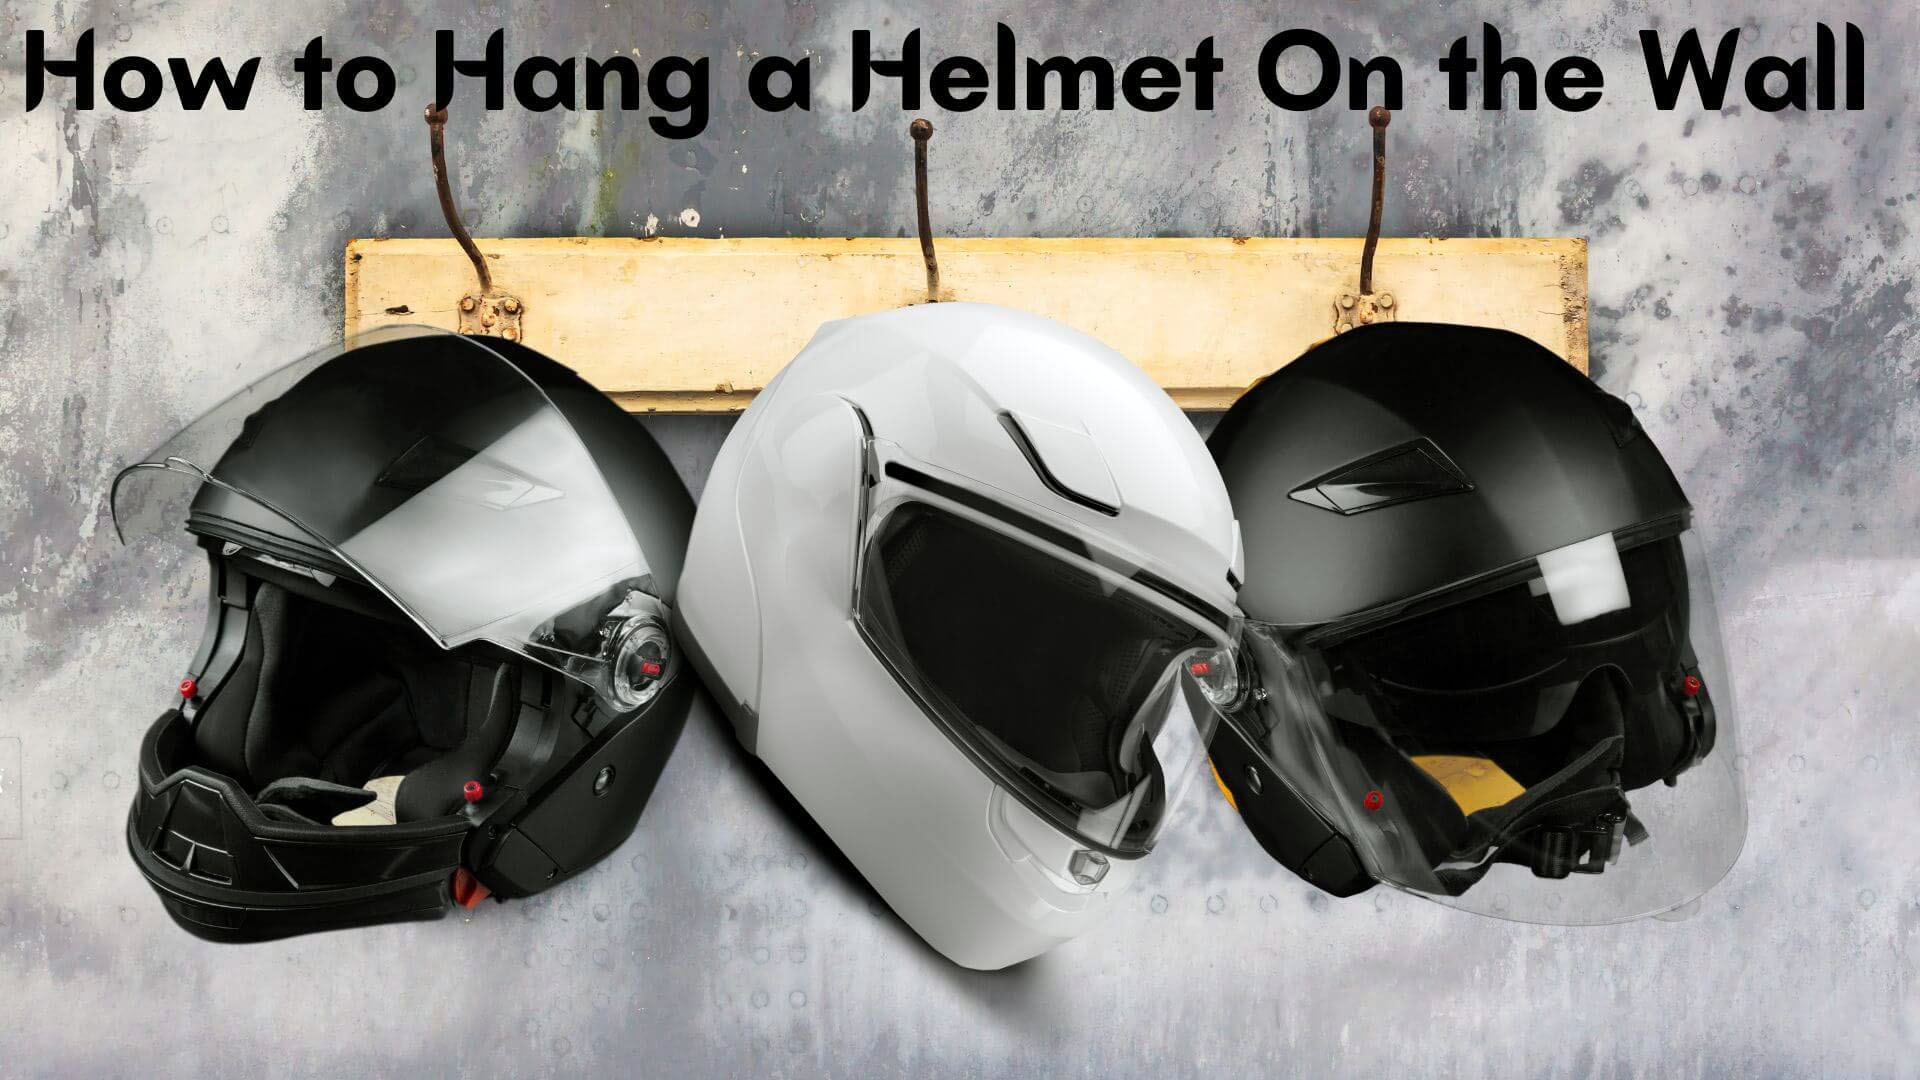 How to Hang a Helmet On The Wall?